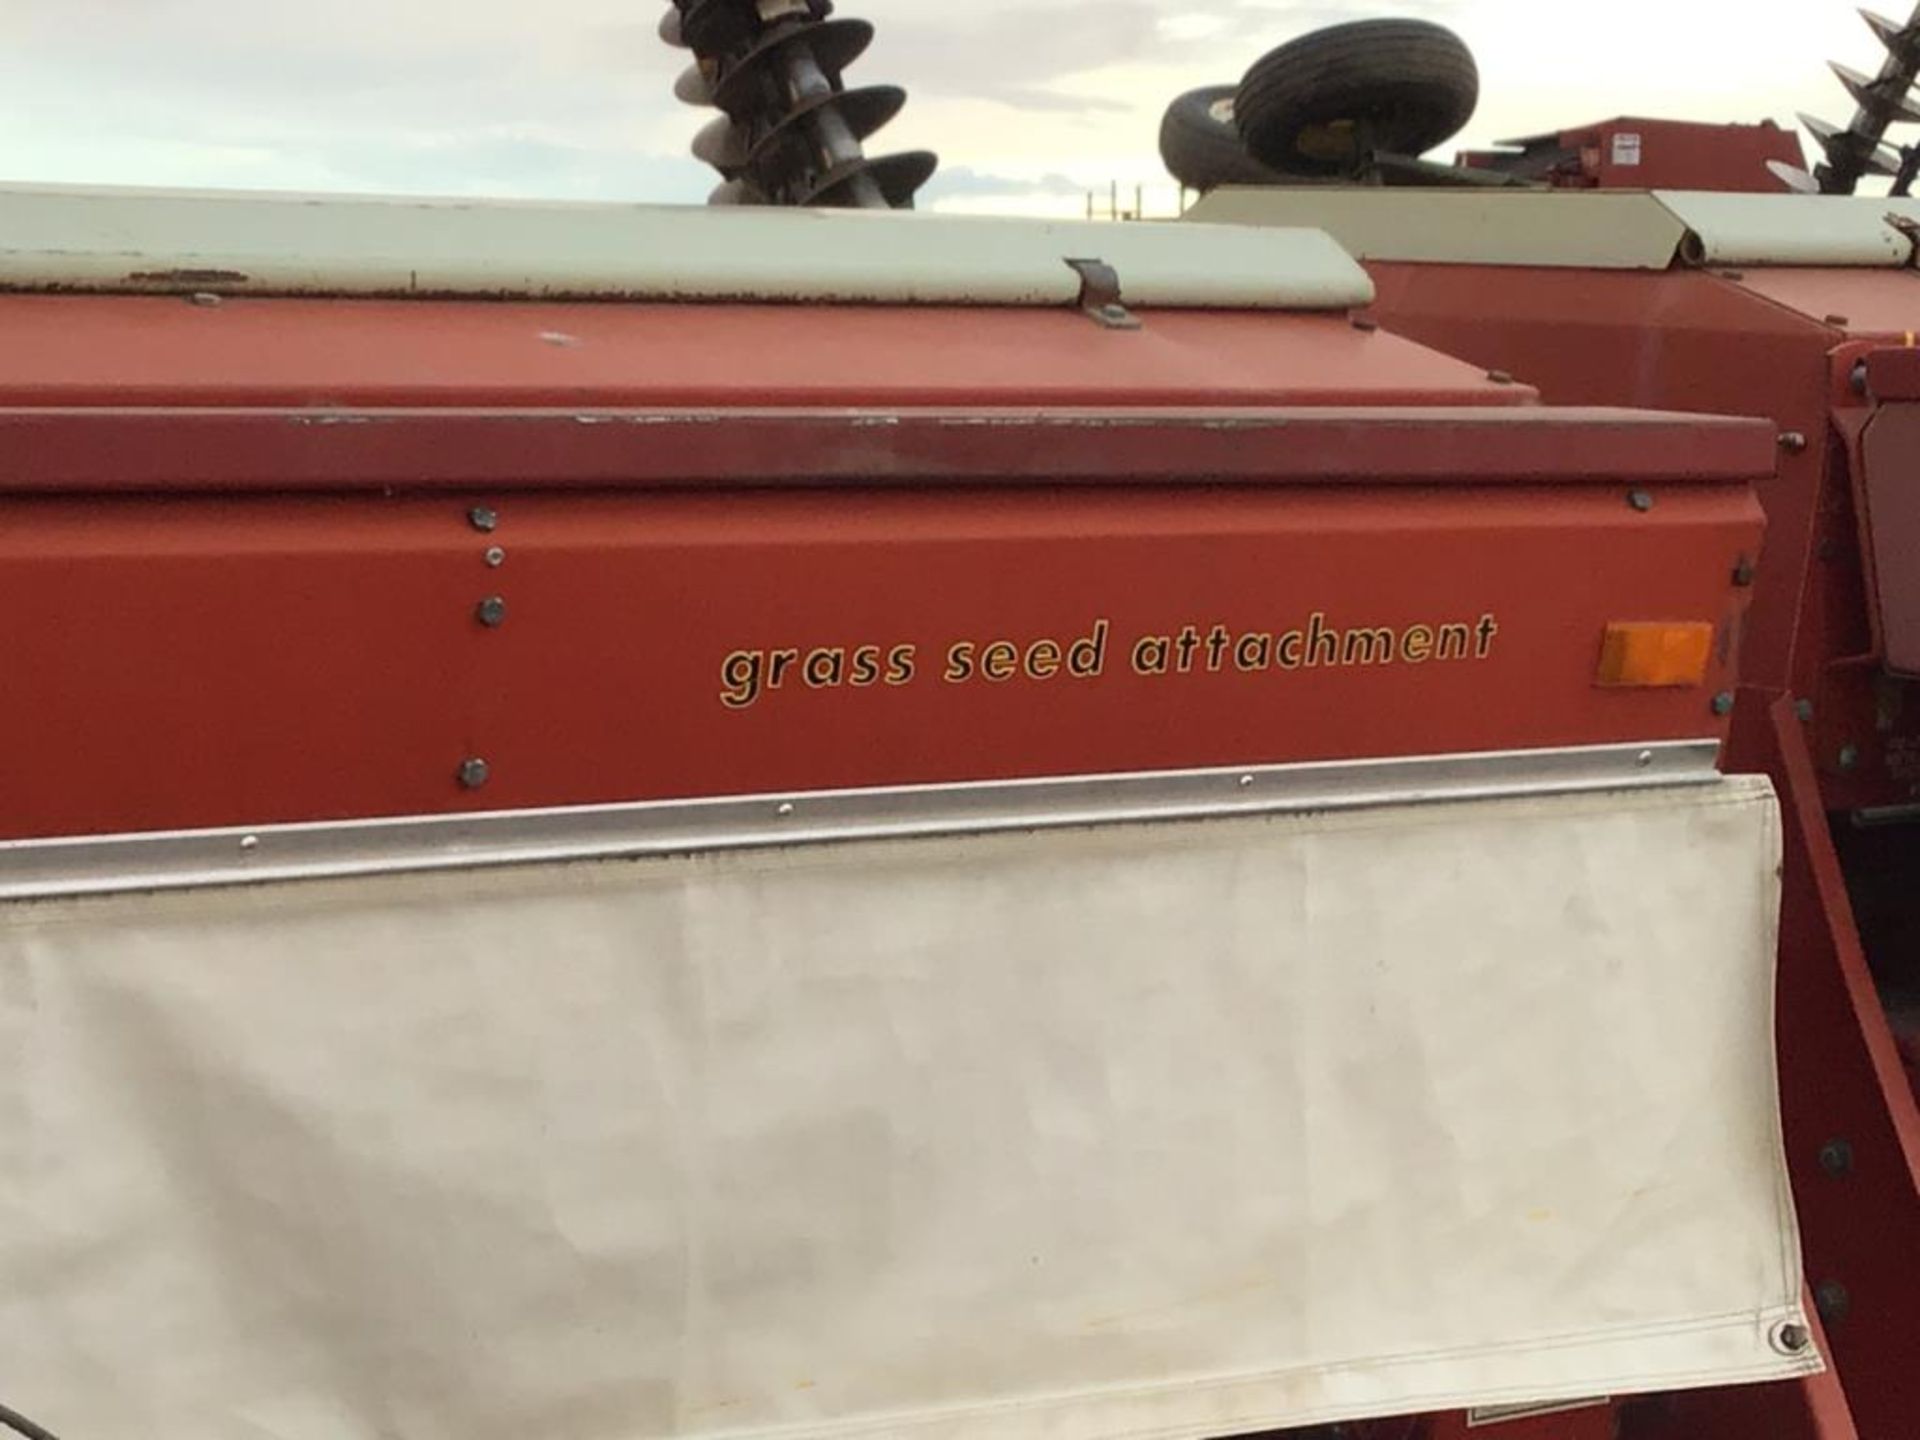 N10 30ft Morris Disc Seed Drill - Image 5 of 8